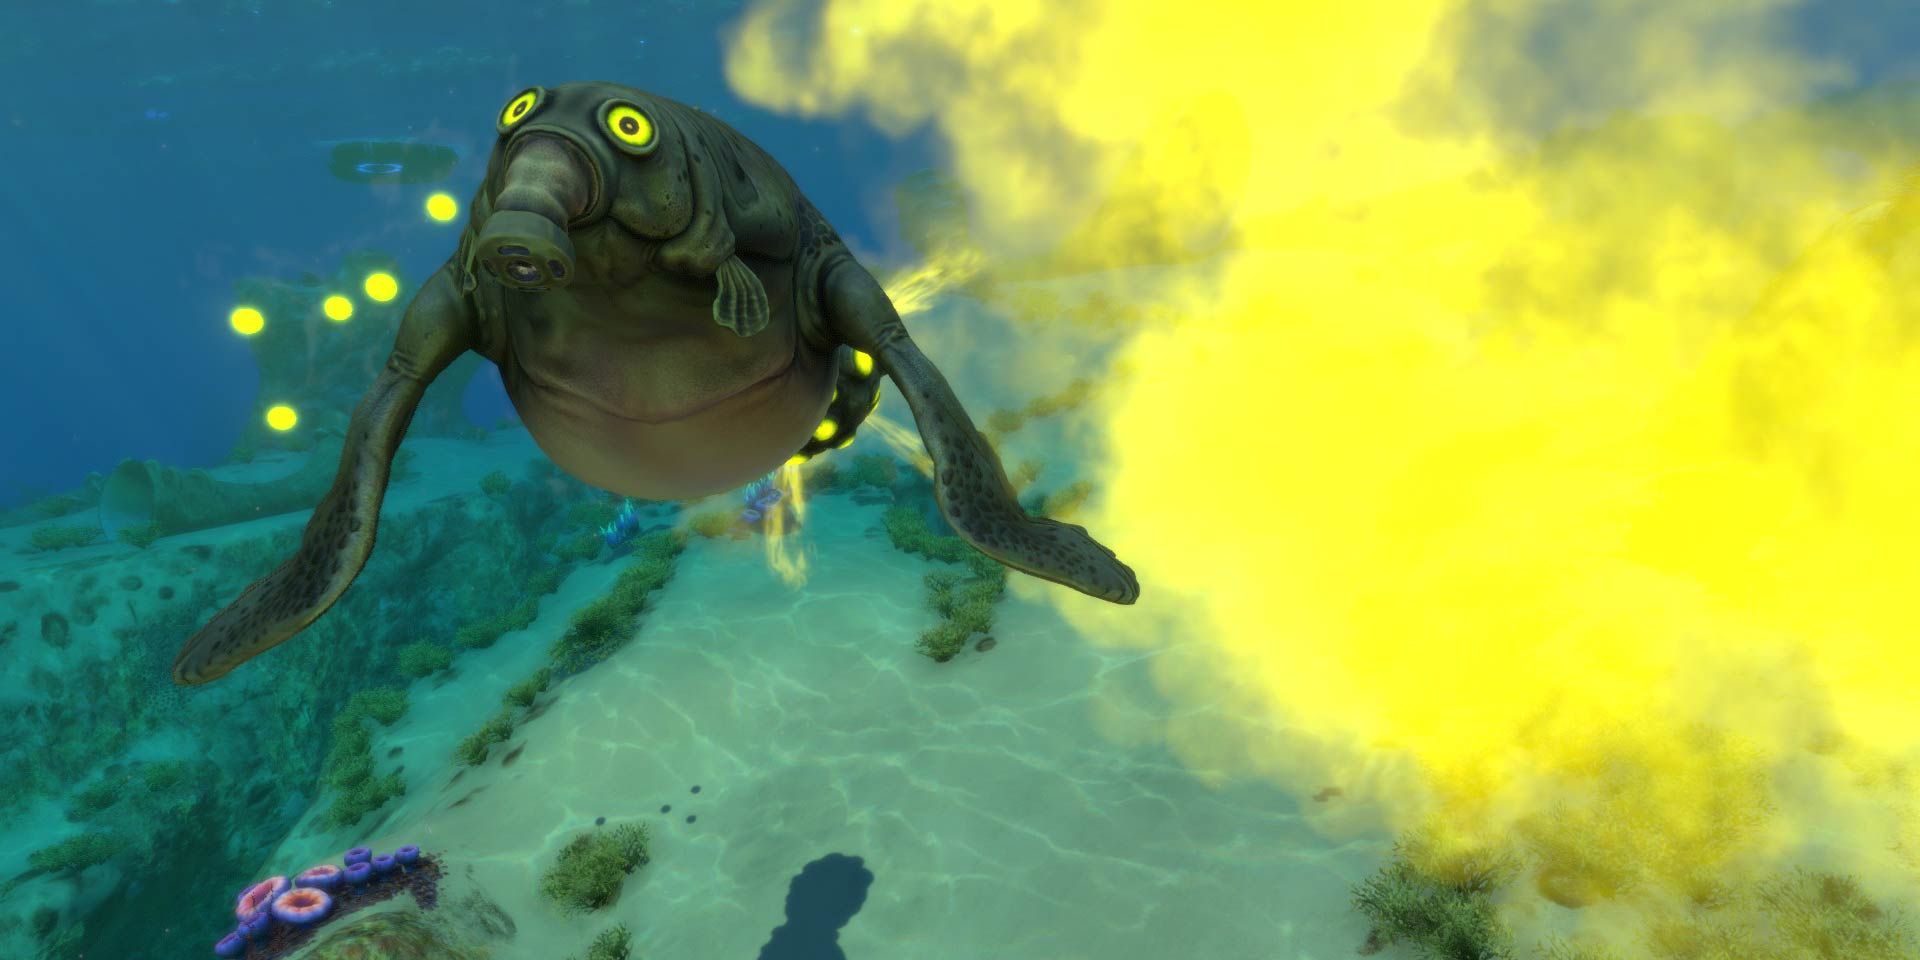 A gasopod from Subnautica in front of a cloud of poison gas.